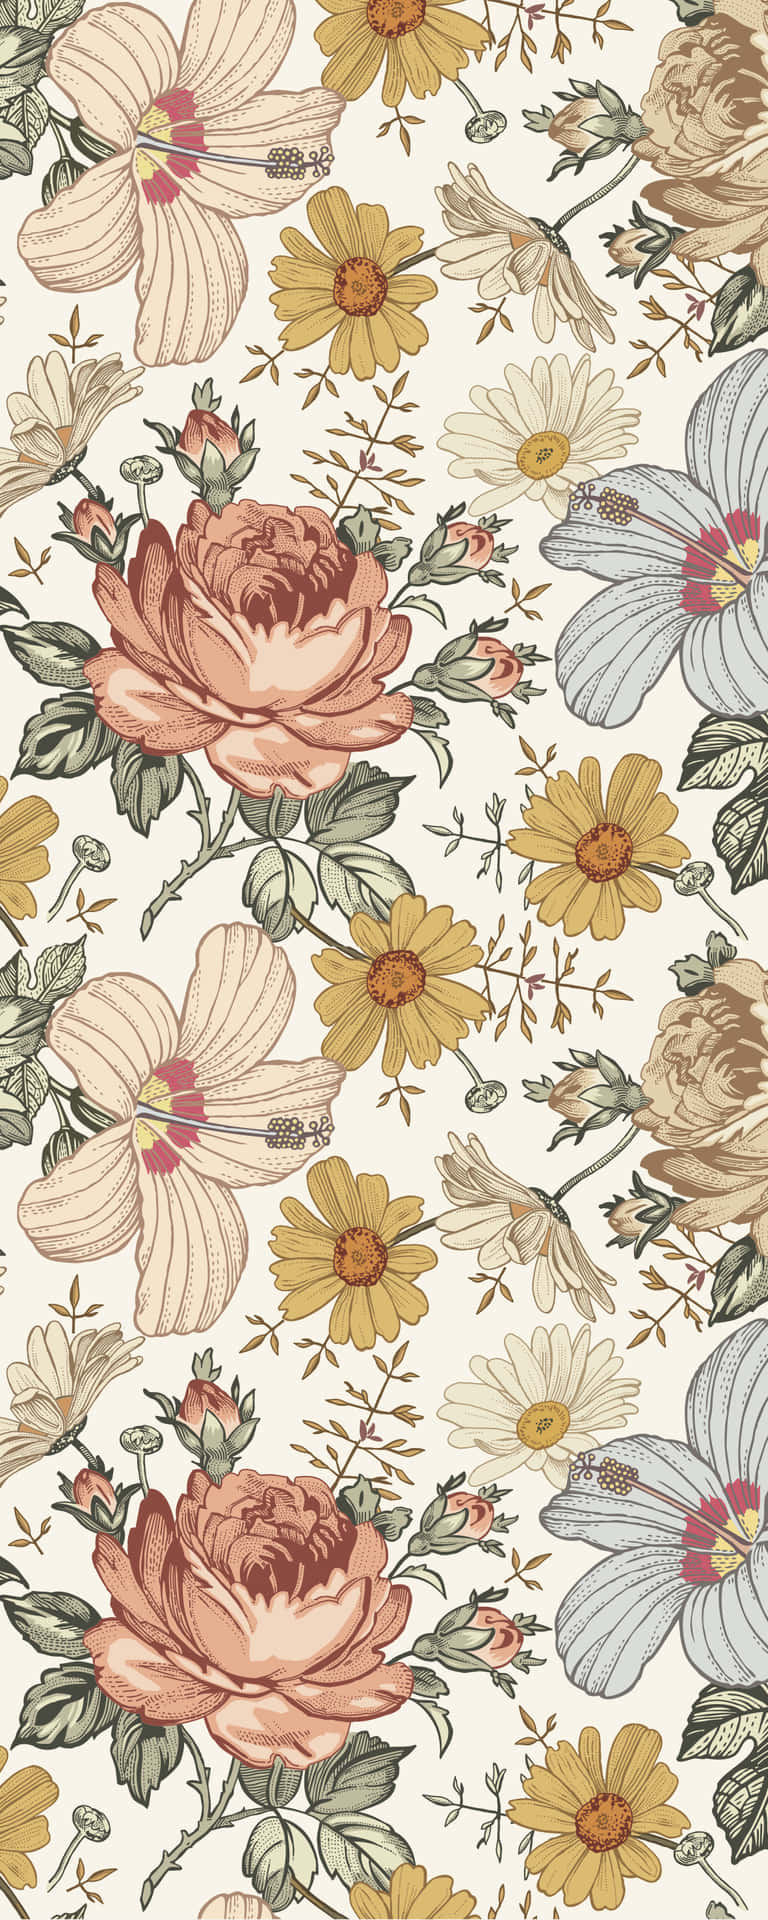 A Floral Pattern With A Lot Of Flowers